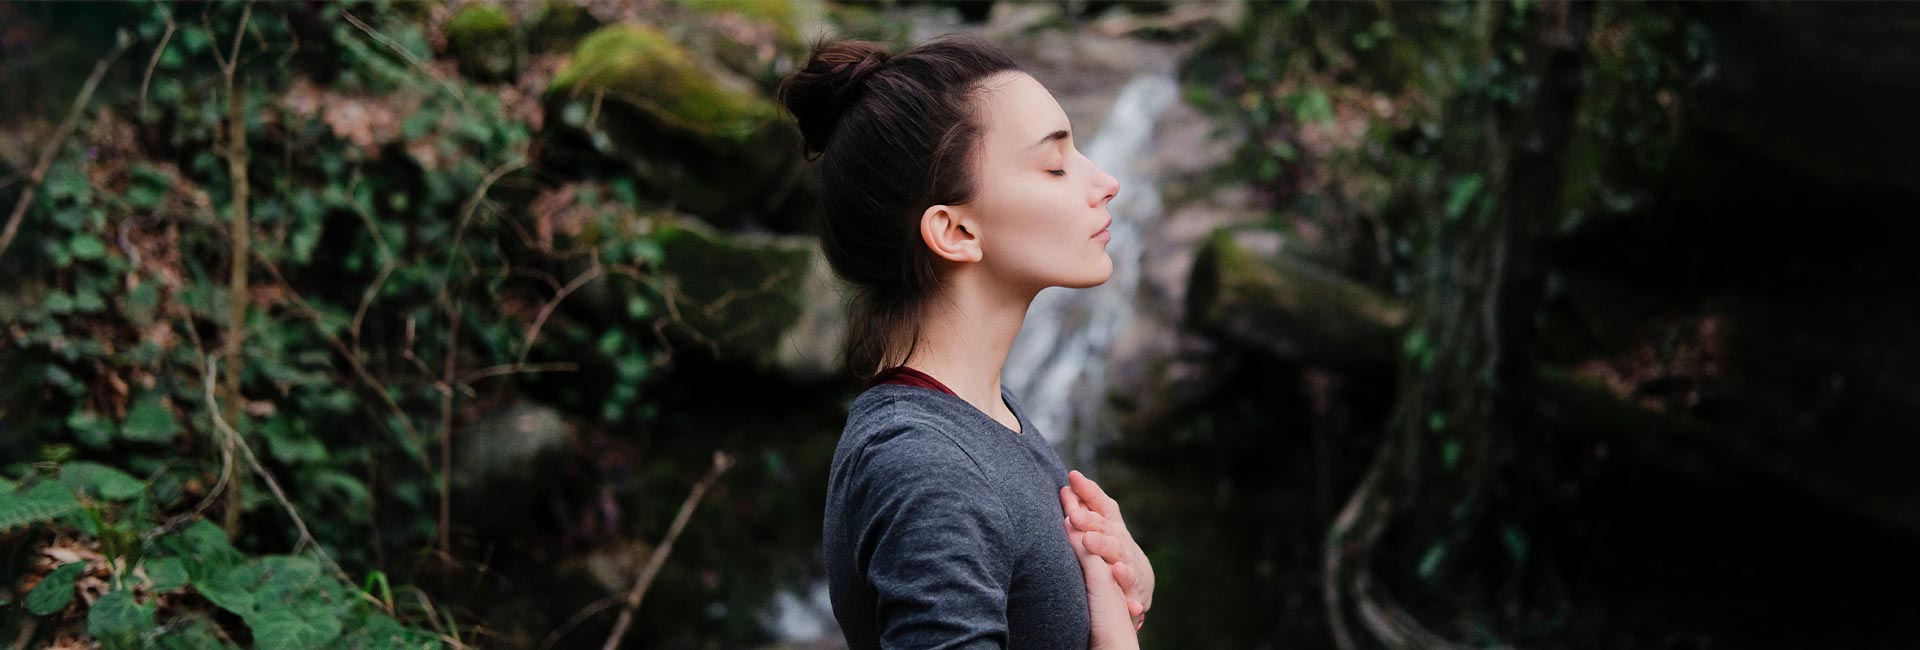 a woman takes time to pay attention to her breathing while outdoors